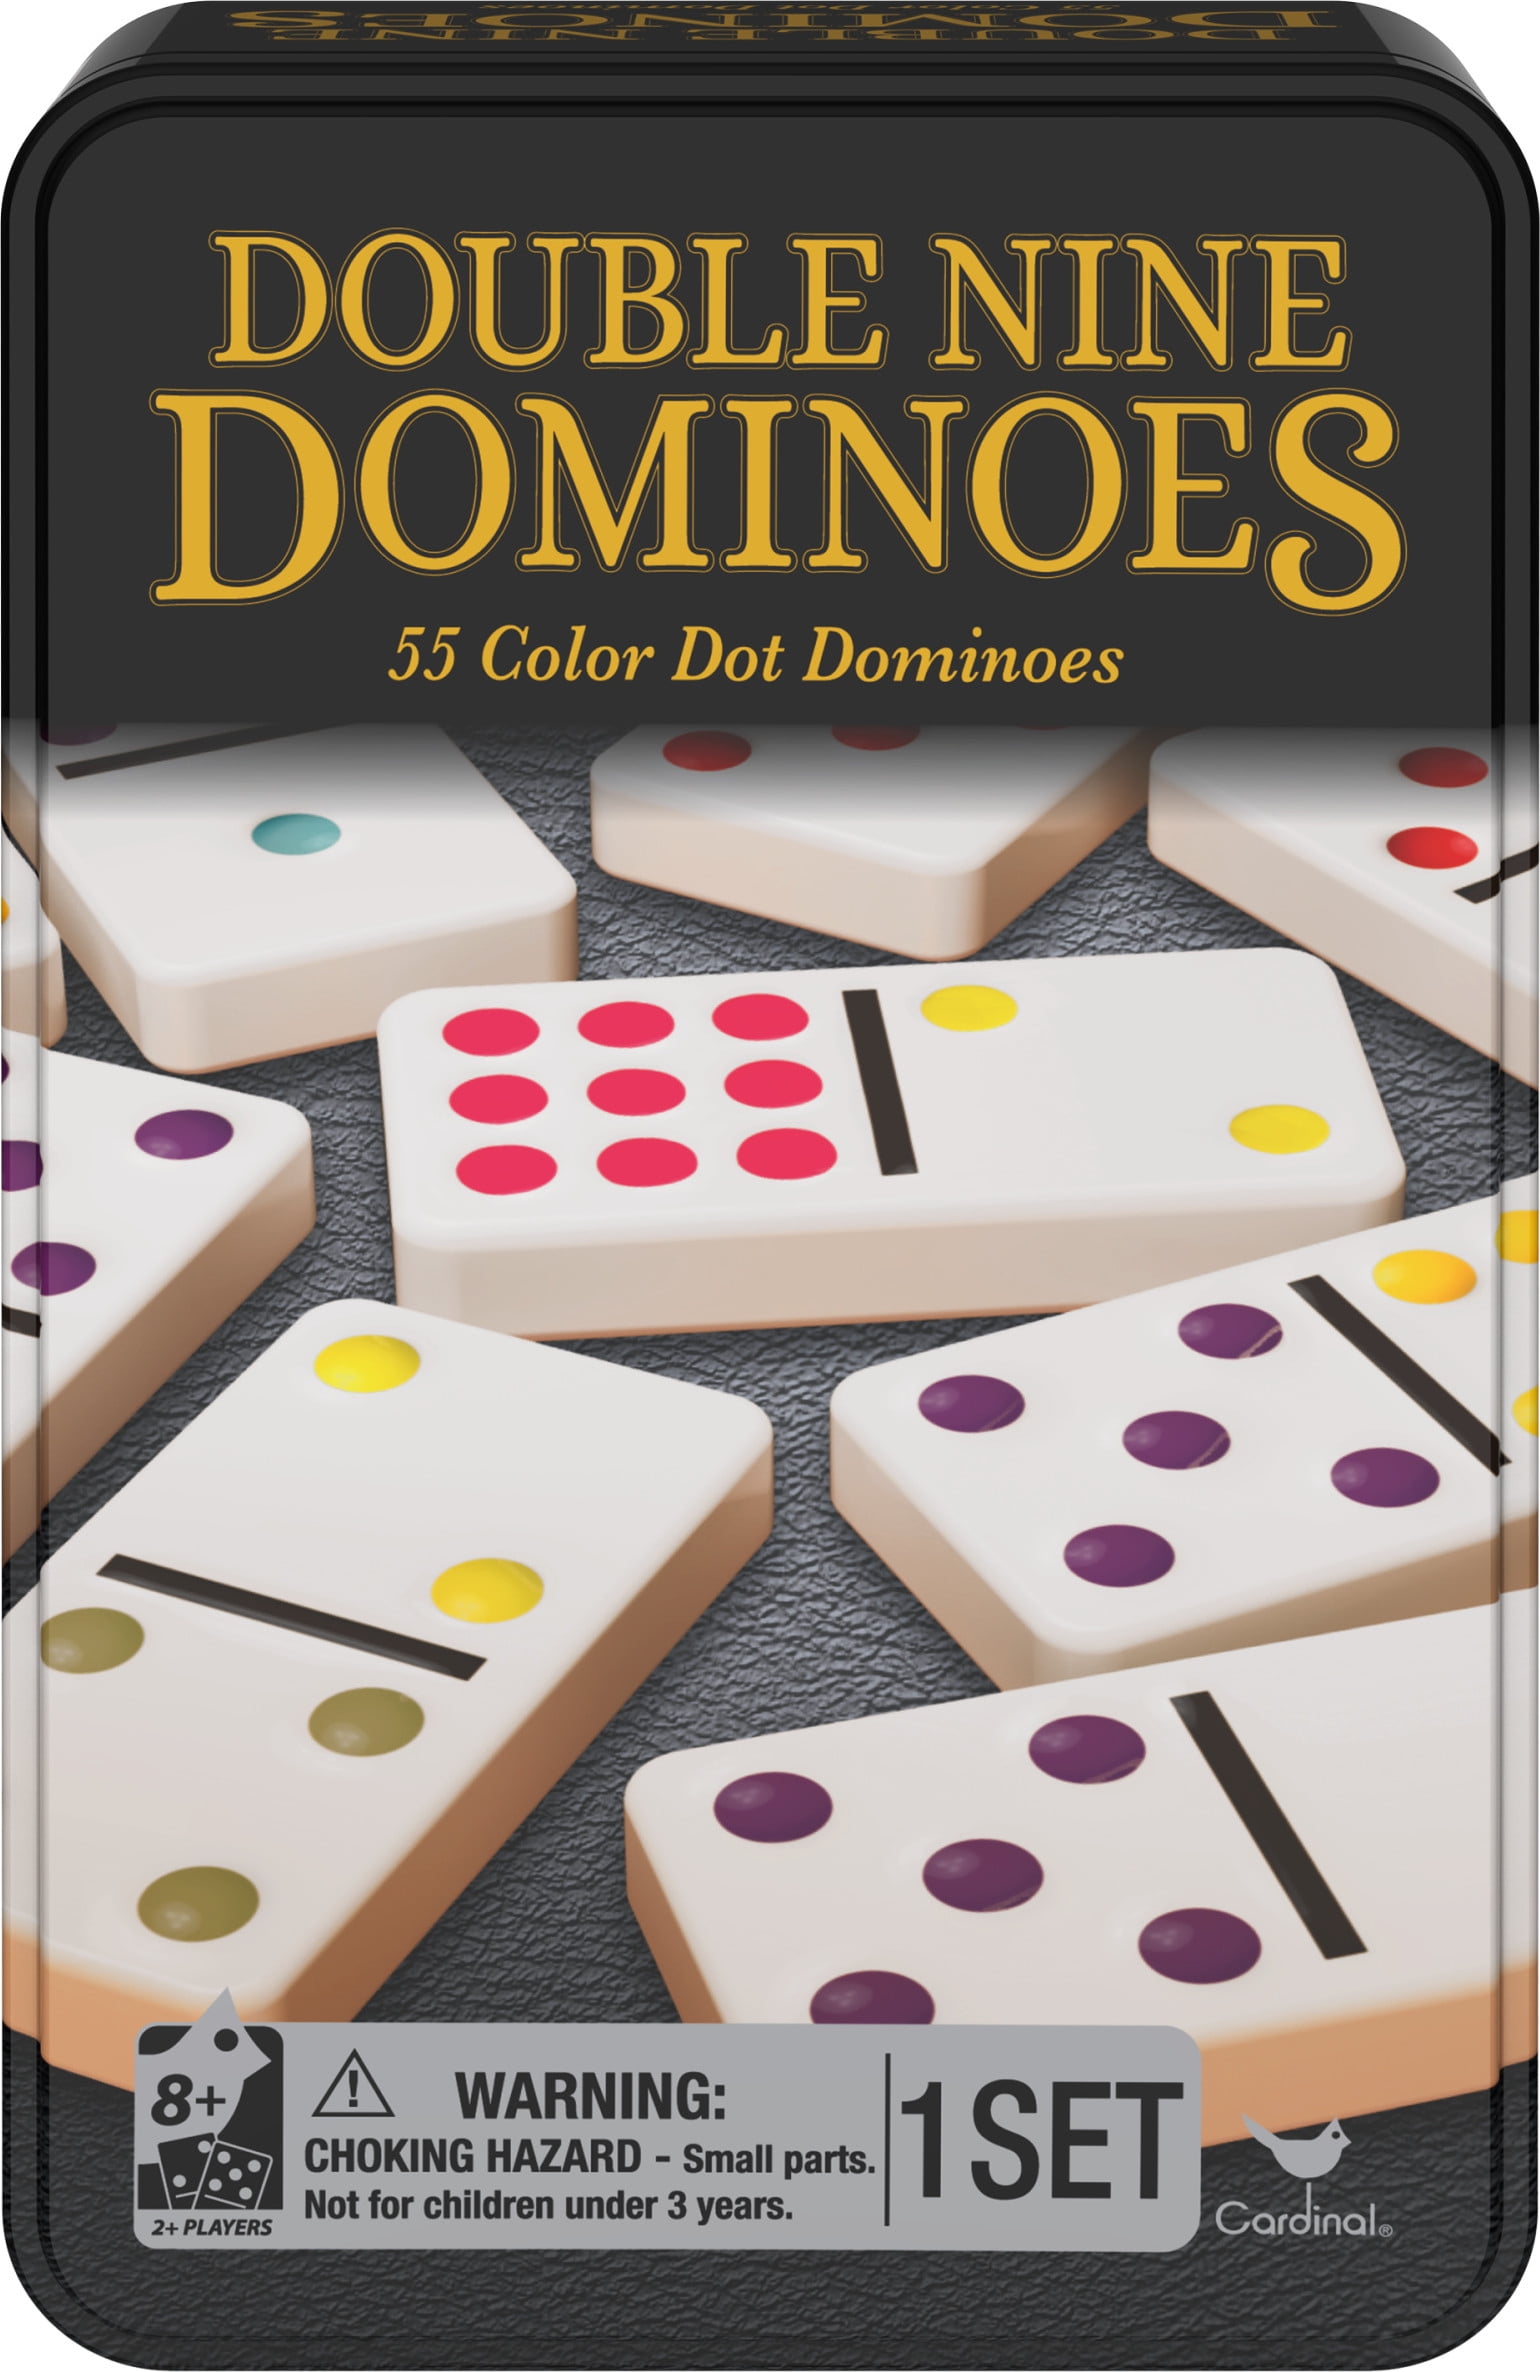 2 Packs Dominoes By Classic Each Set Contains 28 PCS Dominoes & Instructions 